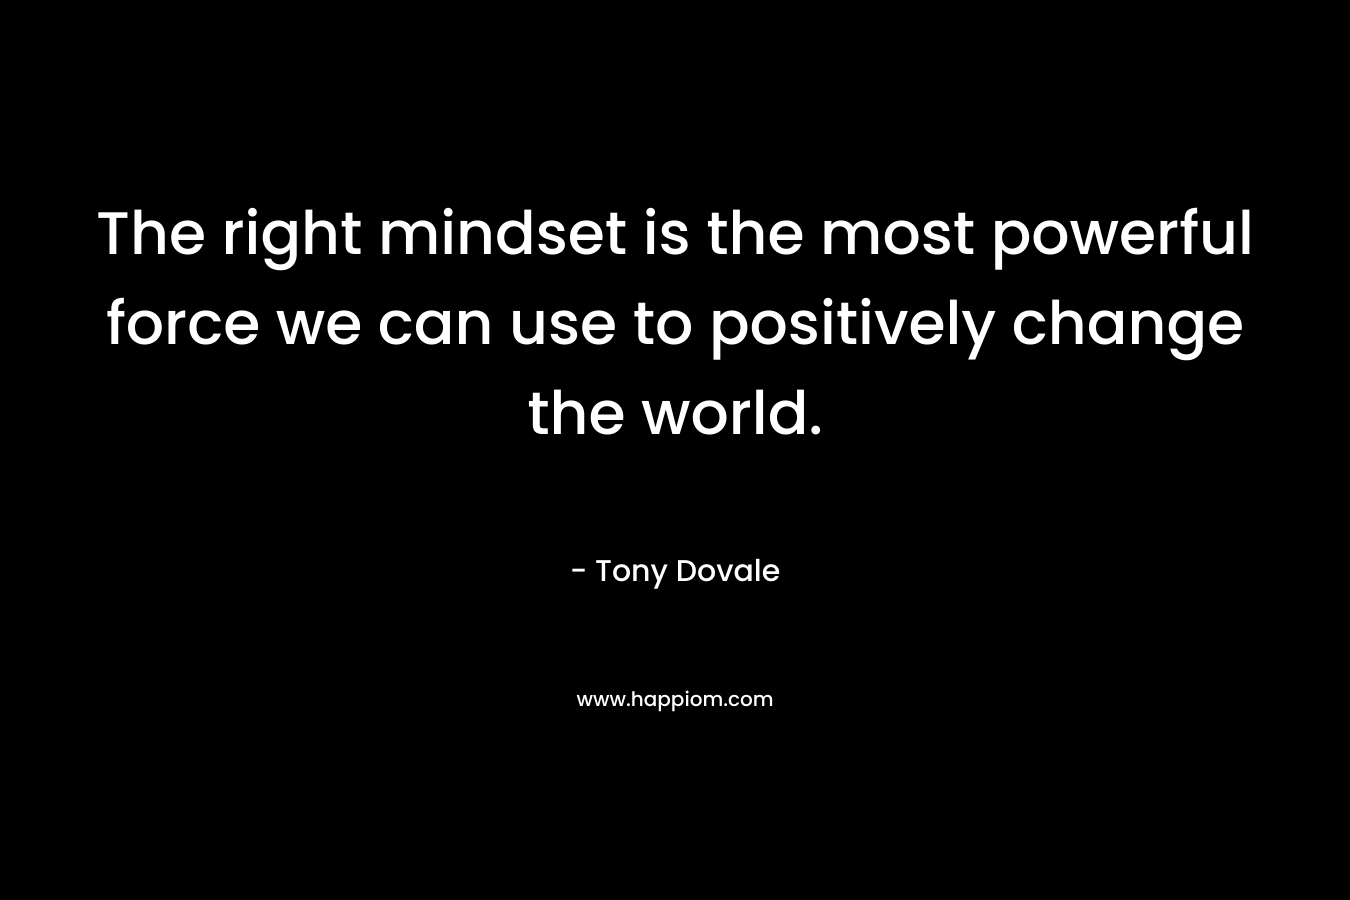 The right mindset is the most powerful force we can use to positively change the world.